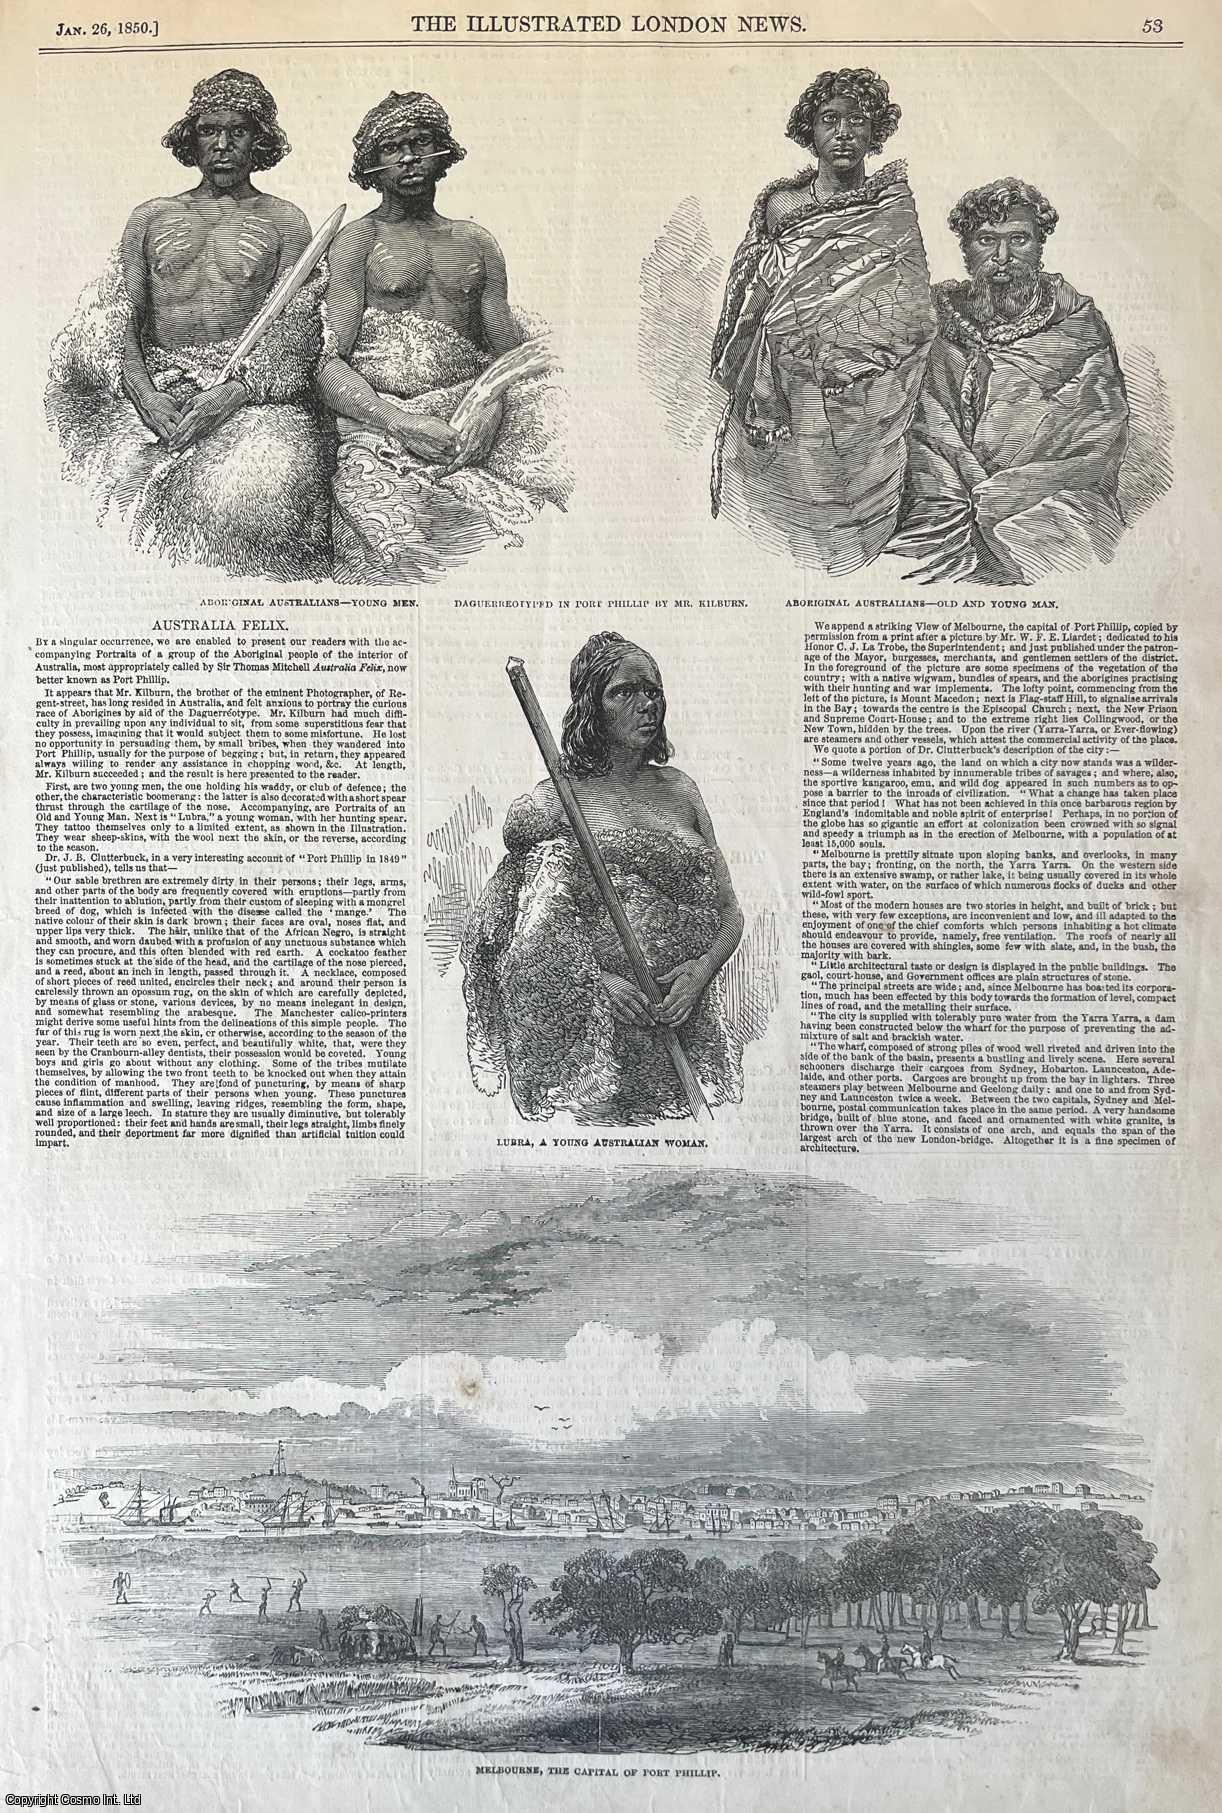 AUSTRALIA - Aboriginal Australians from Australia Felix, now Port Phillip and a view of Melbourne. An original print from the Illustrated London News, 1850.